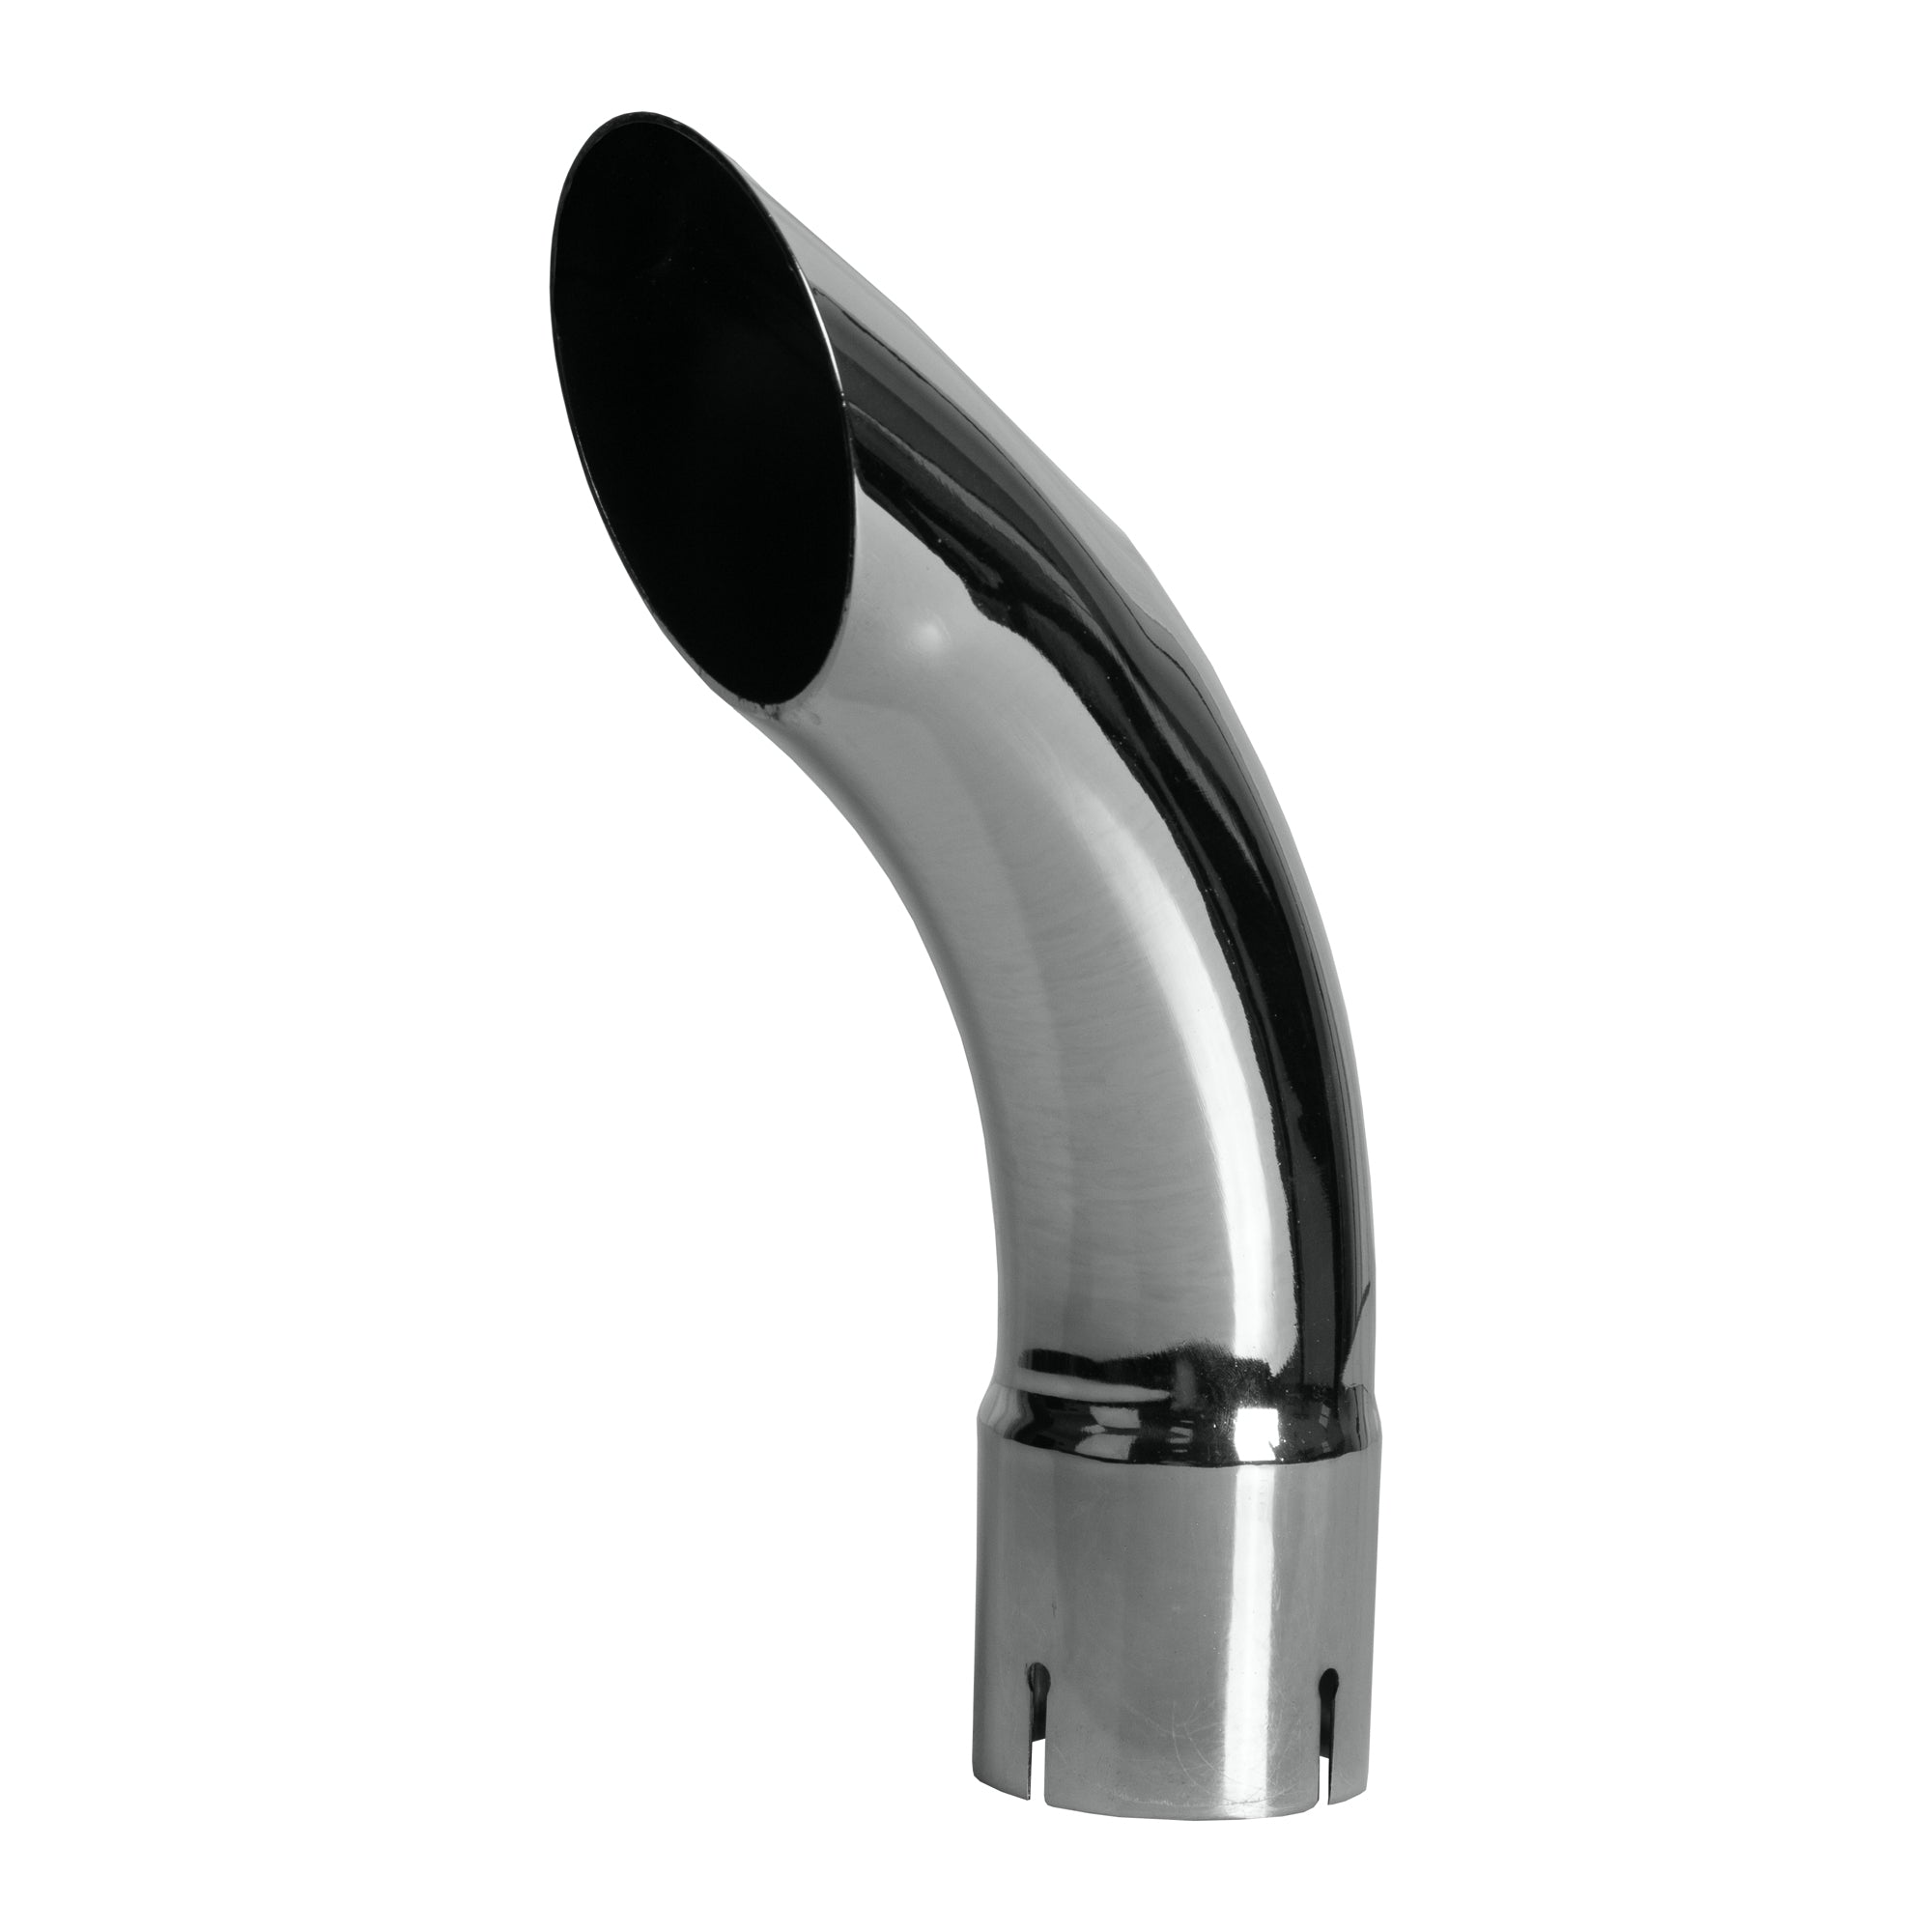 Exhaust Pipe Replacement for UNIVERSAL 2-3/4" x 12", Curved Chrome